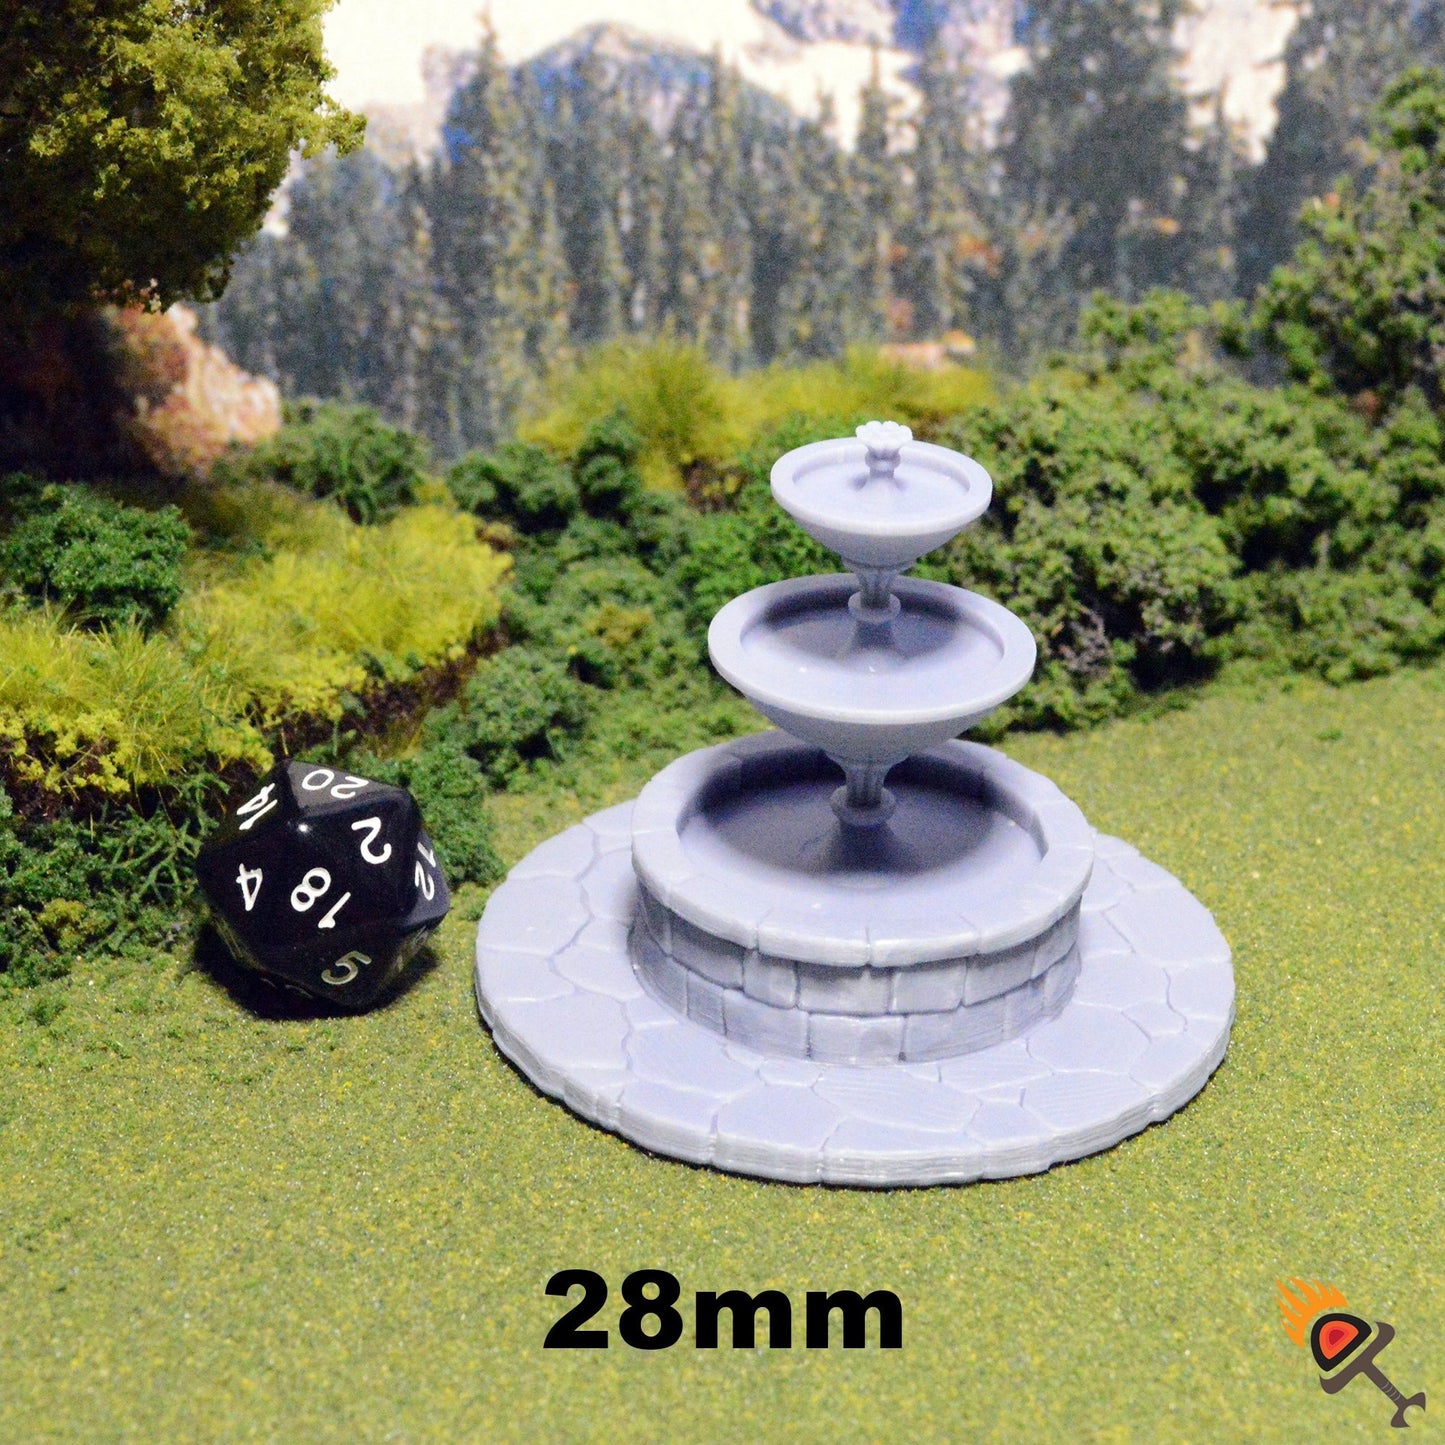 Miniature Town Square 15mm 28mm for D&D Terrain, DnD Pathfinder Miniature Water Well, Water Fountain, Billboard, Noticeboard, Quest Board